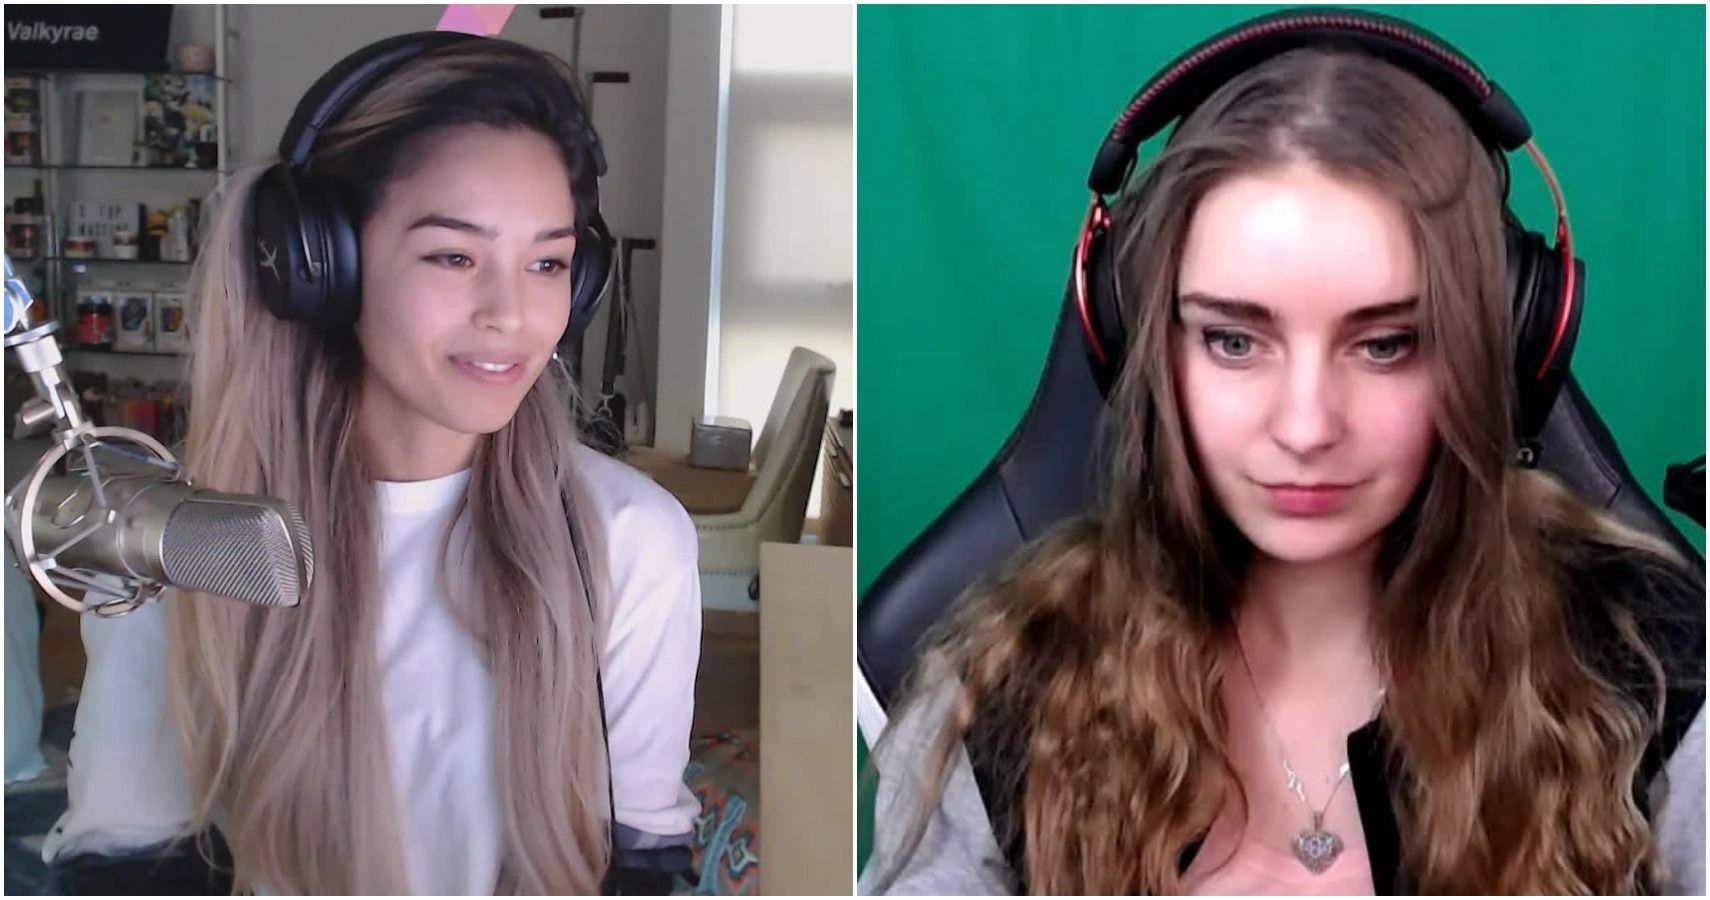 Has Meowbahh Unvealed Her Face? Know About The Twitch Streamer